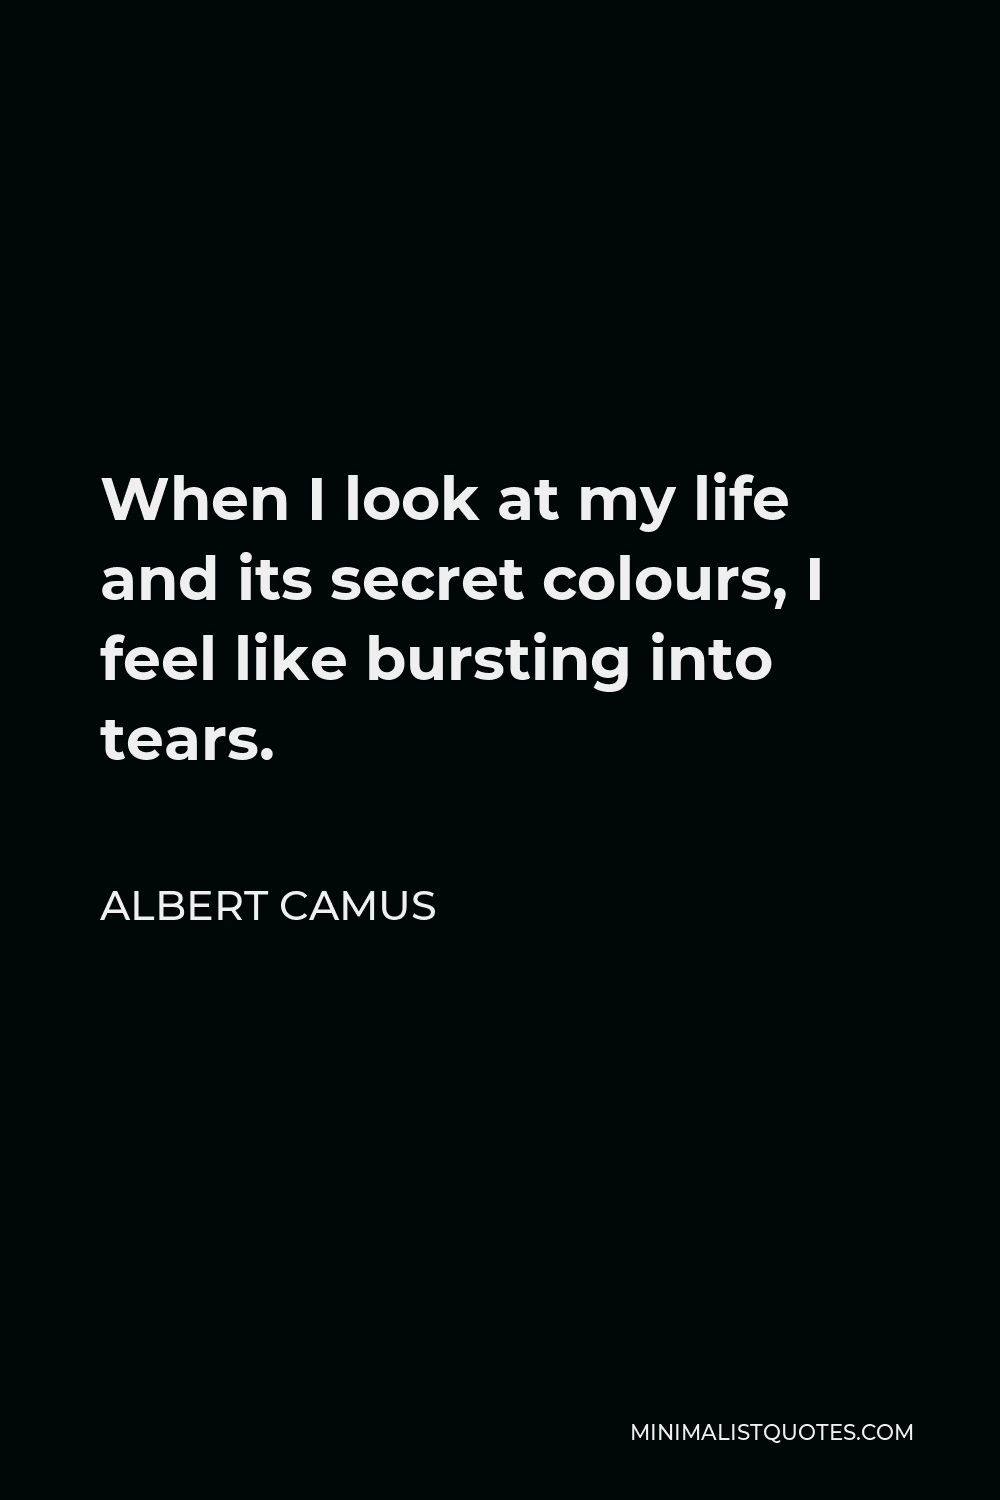 Albert Camus Quote - When I look at my life and its secret colours, I feel like bursting into tears.